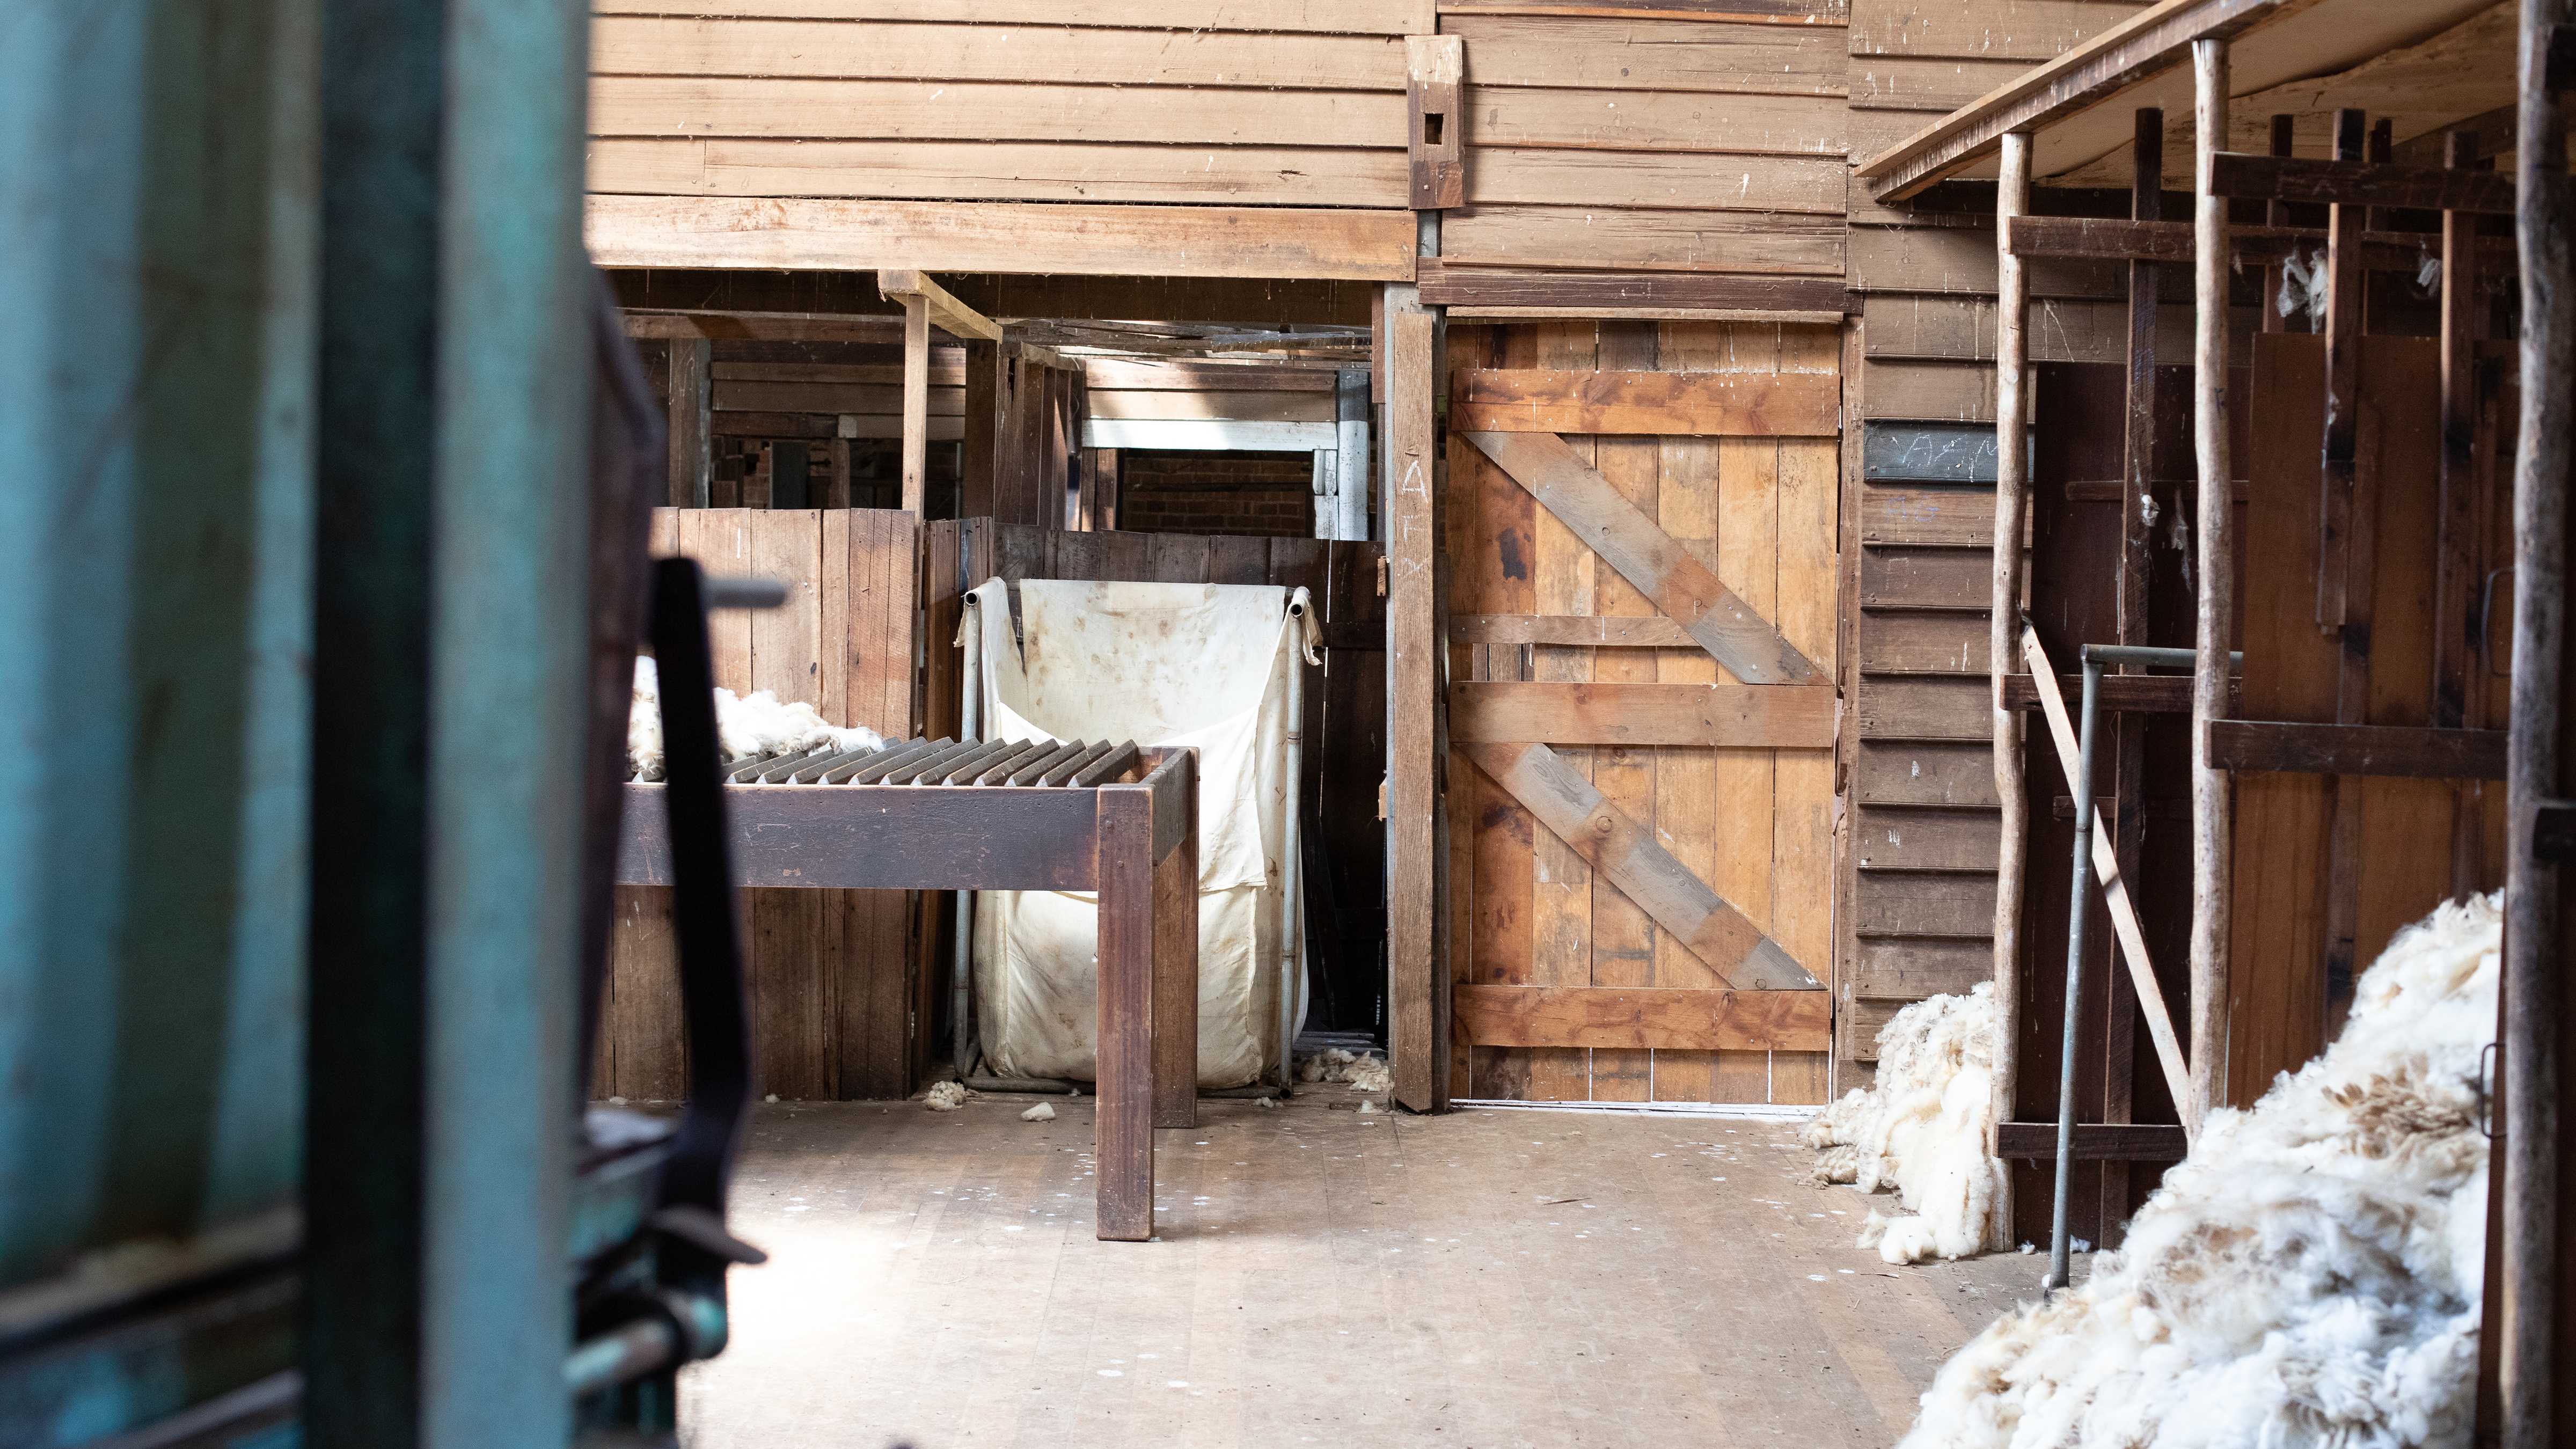 Inside the shearing shed a wool press stands to the left with a classing table in the background and a woolpack hangs in a stand. The timber door is closed and there is a pile of wool on the right hand side. Photo: Kieran Bradley.